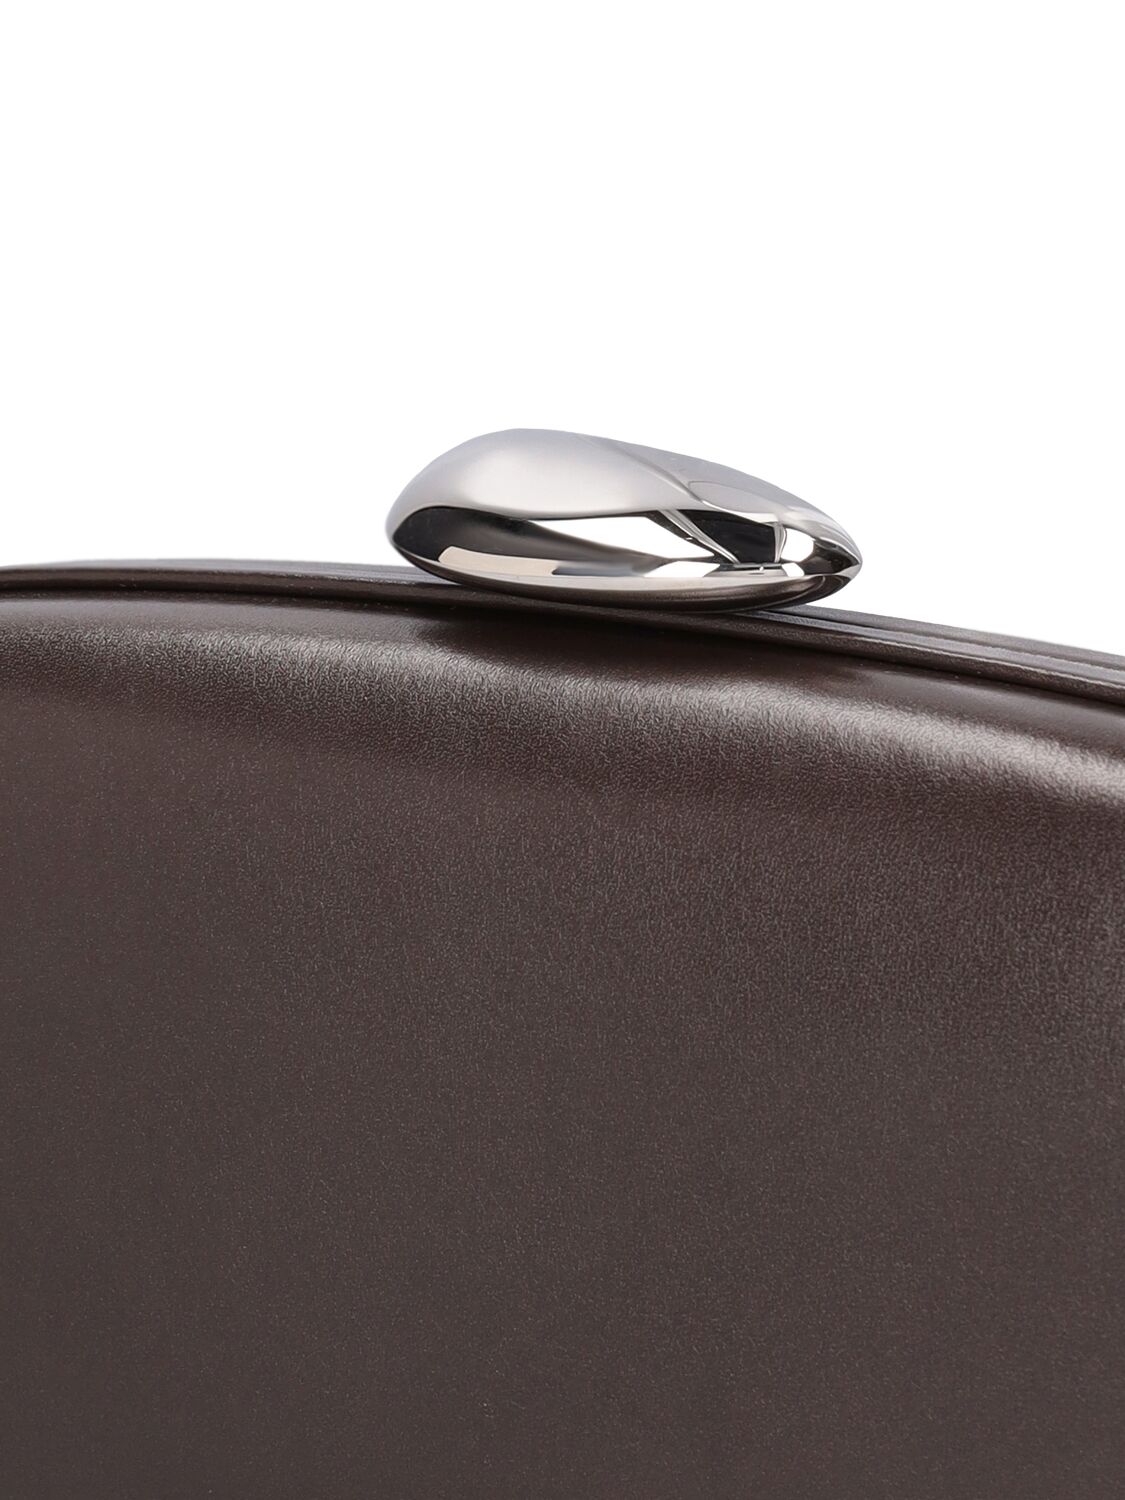 Shop Michael Kors Tina Minaudiere Leather Clutch In Chocolate